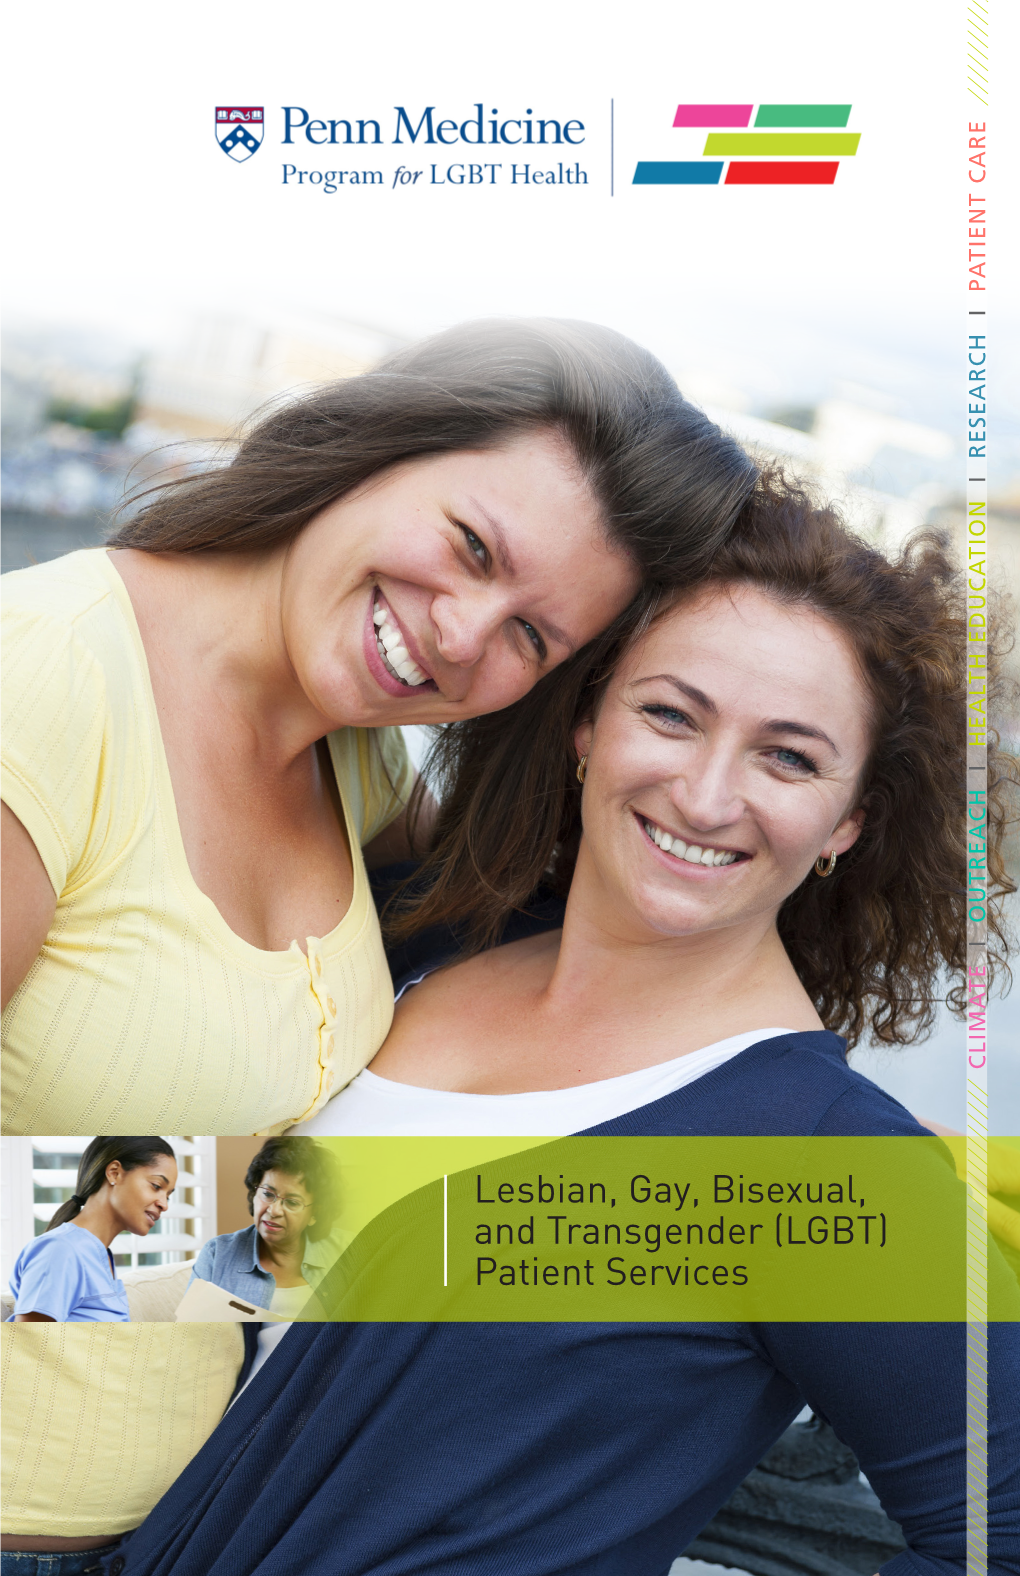 Lesbian, Gay, Bisexual, and Transgender (LGBT) Patient Services